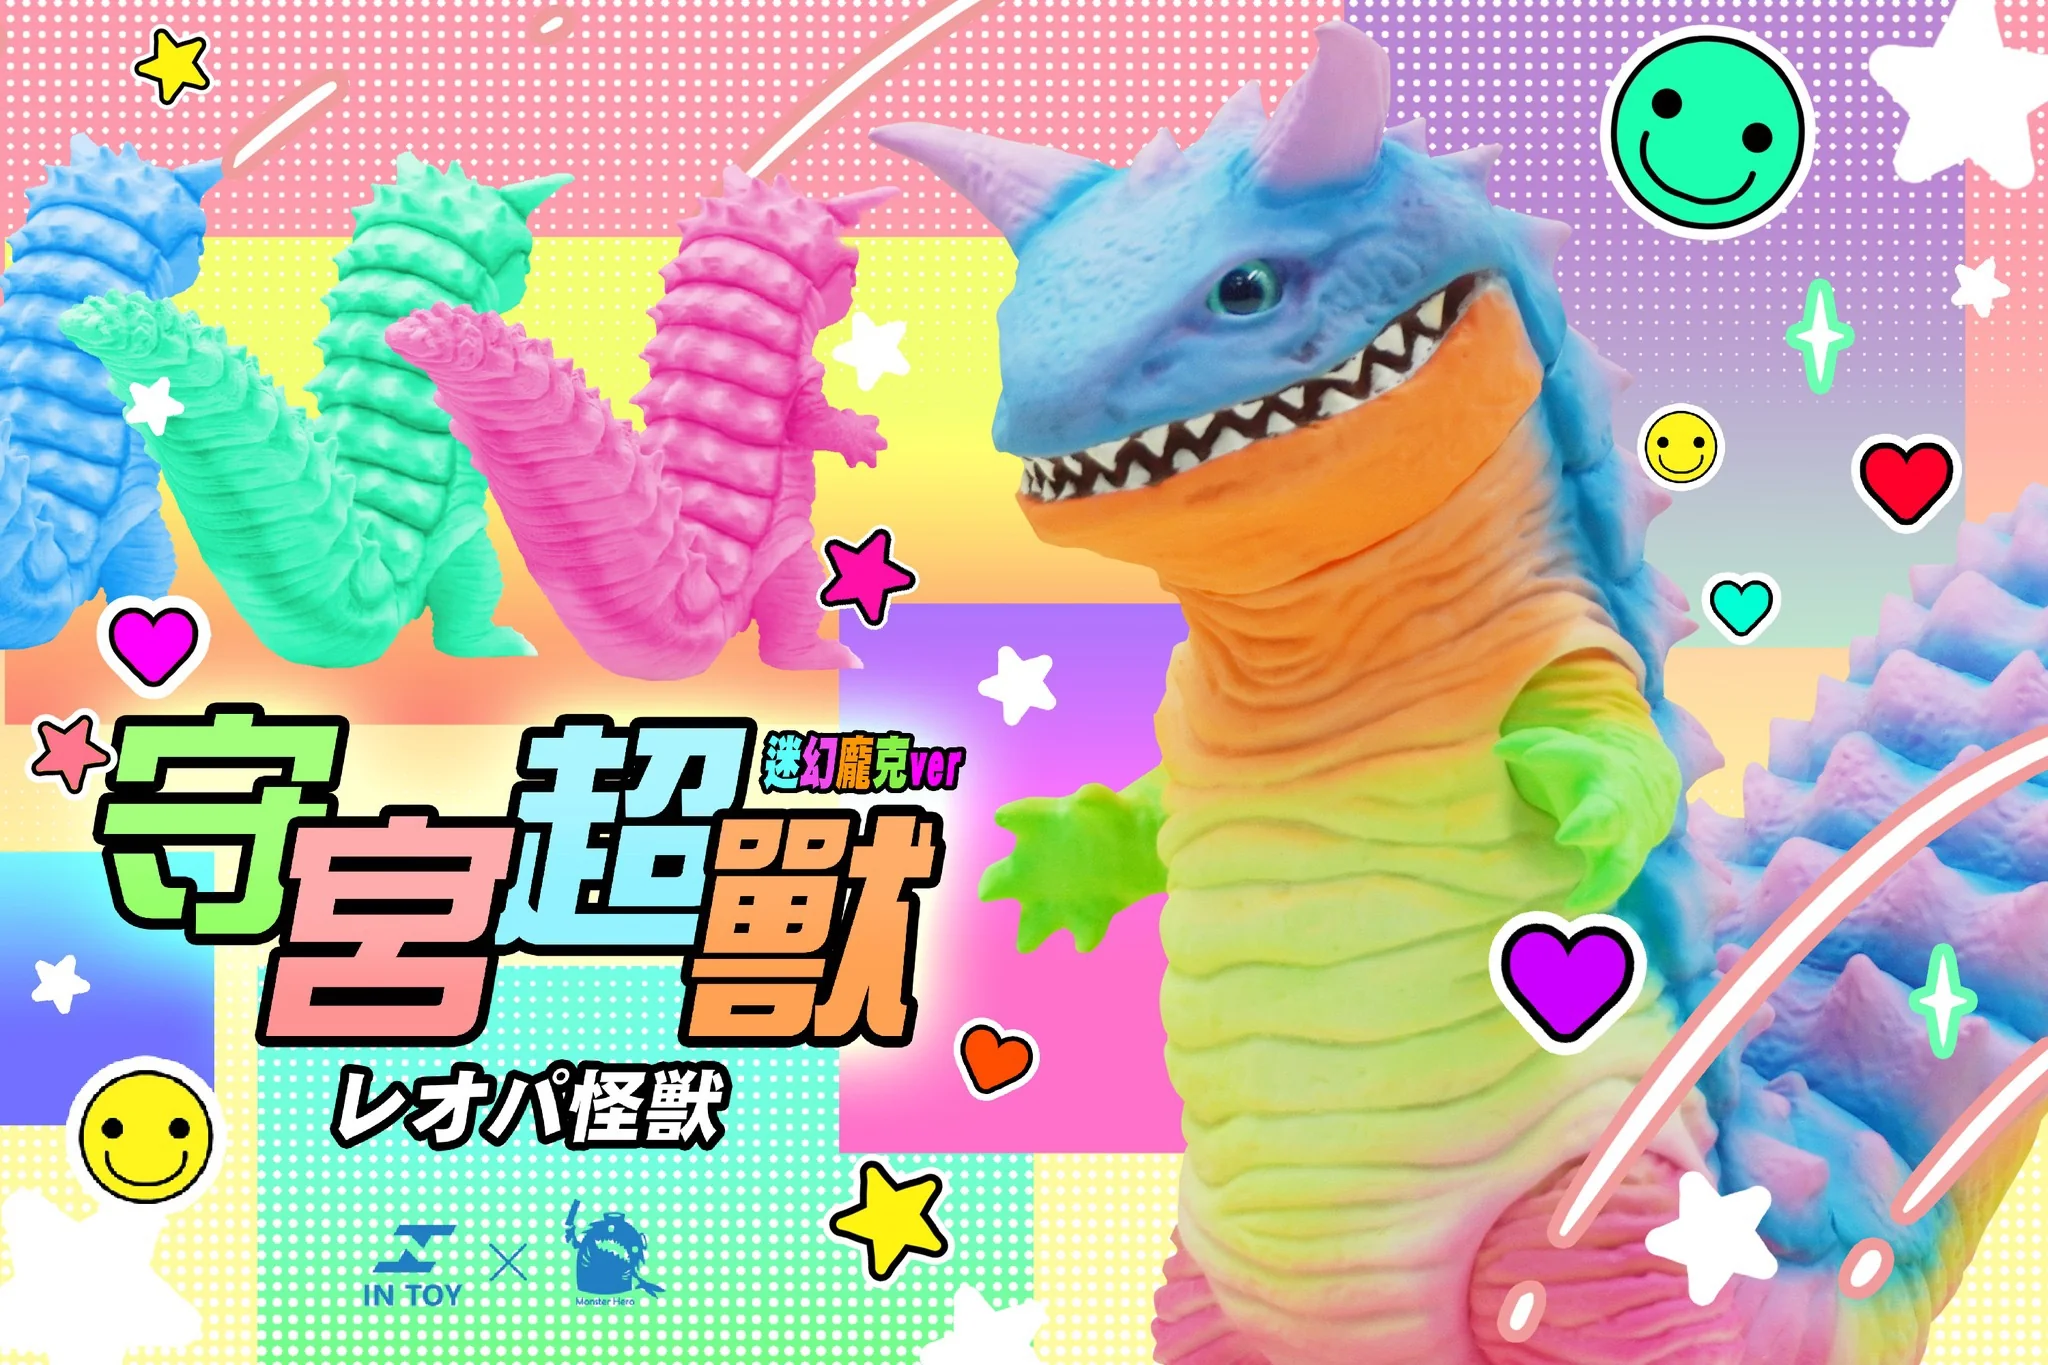 Gecko Super Beast -Psychedelic Punk .Ver By INTOY X Monster Hero